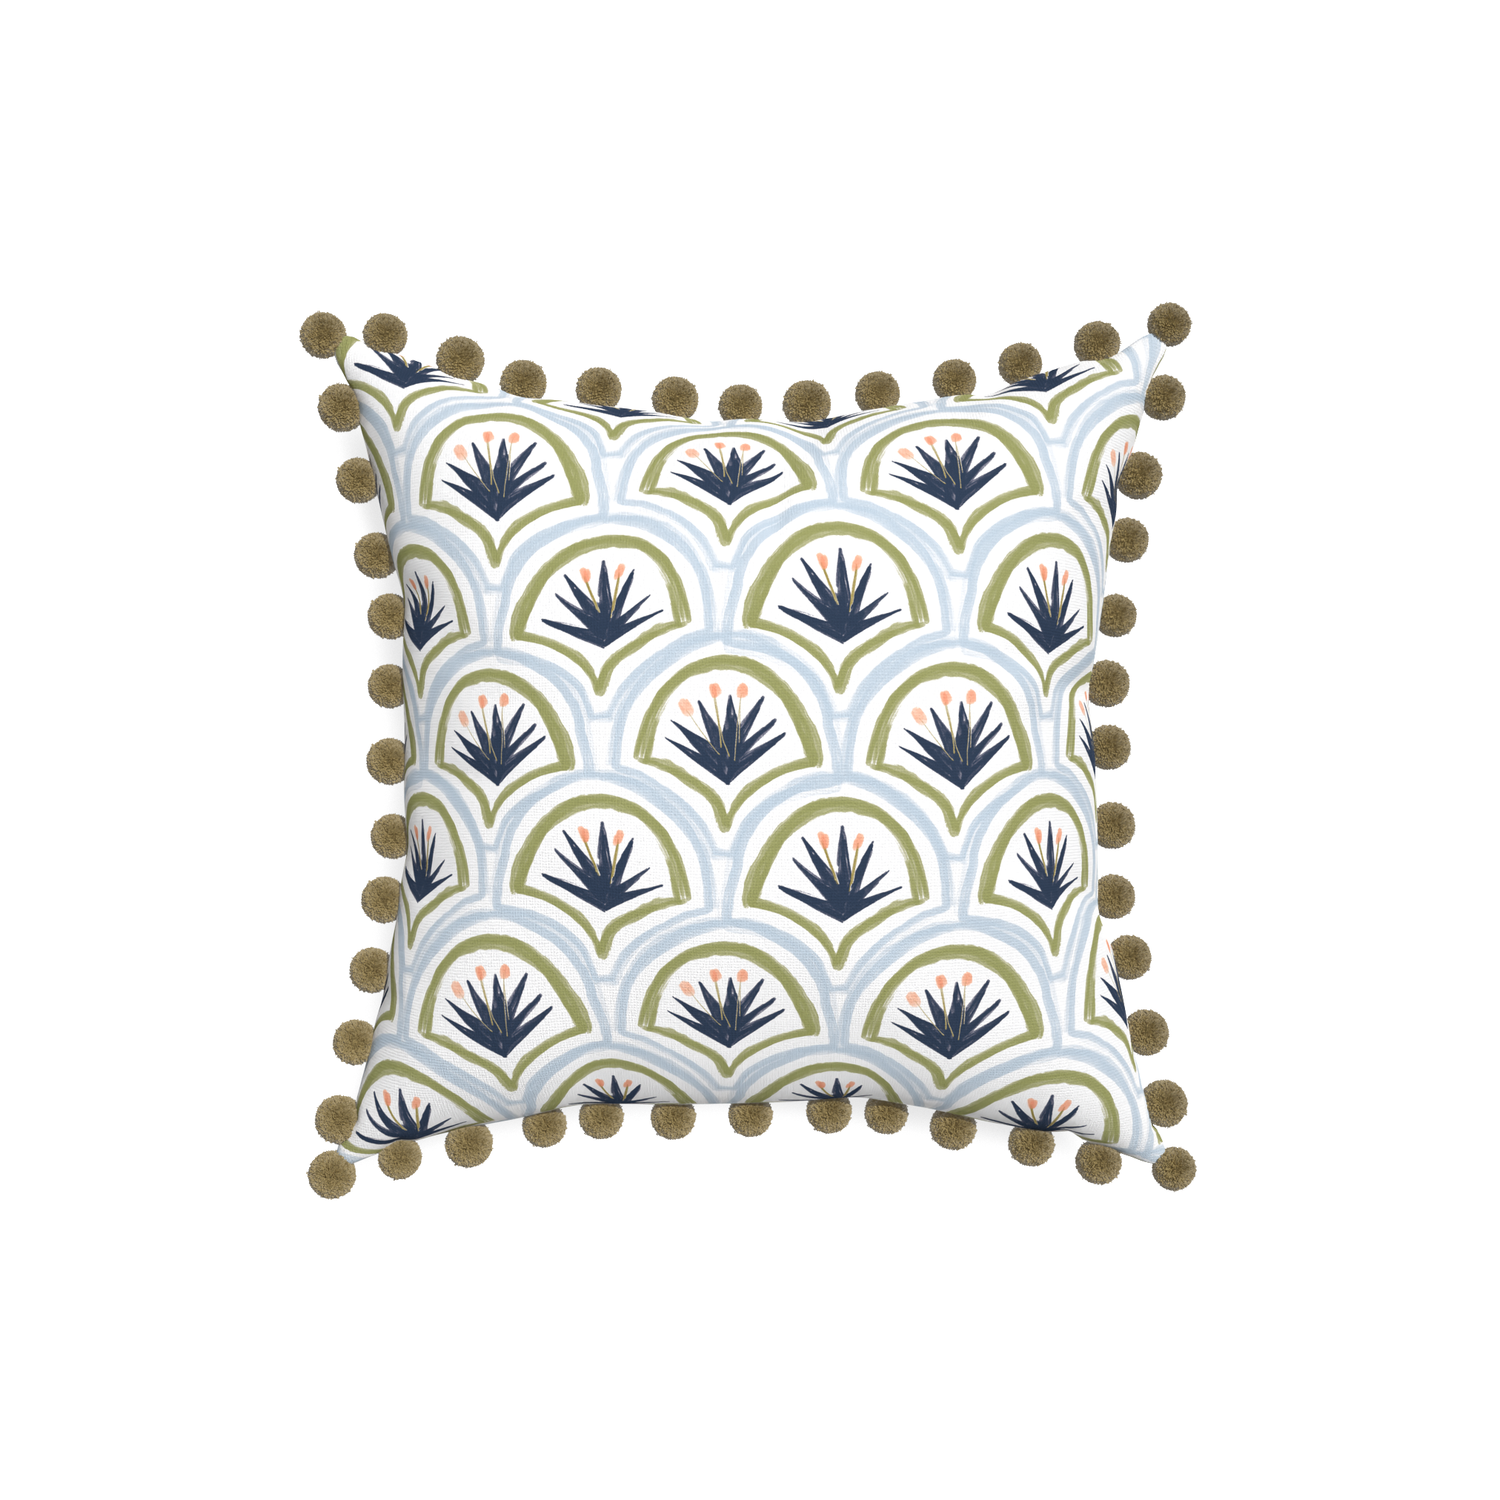 18-square thatcher midnight custom art deco palm patternpillow with olive pom pom on white background